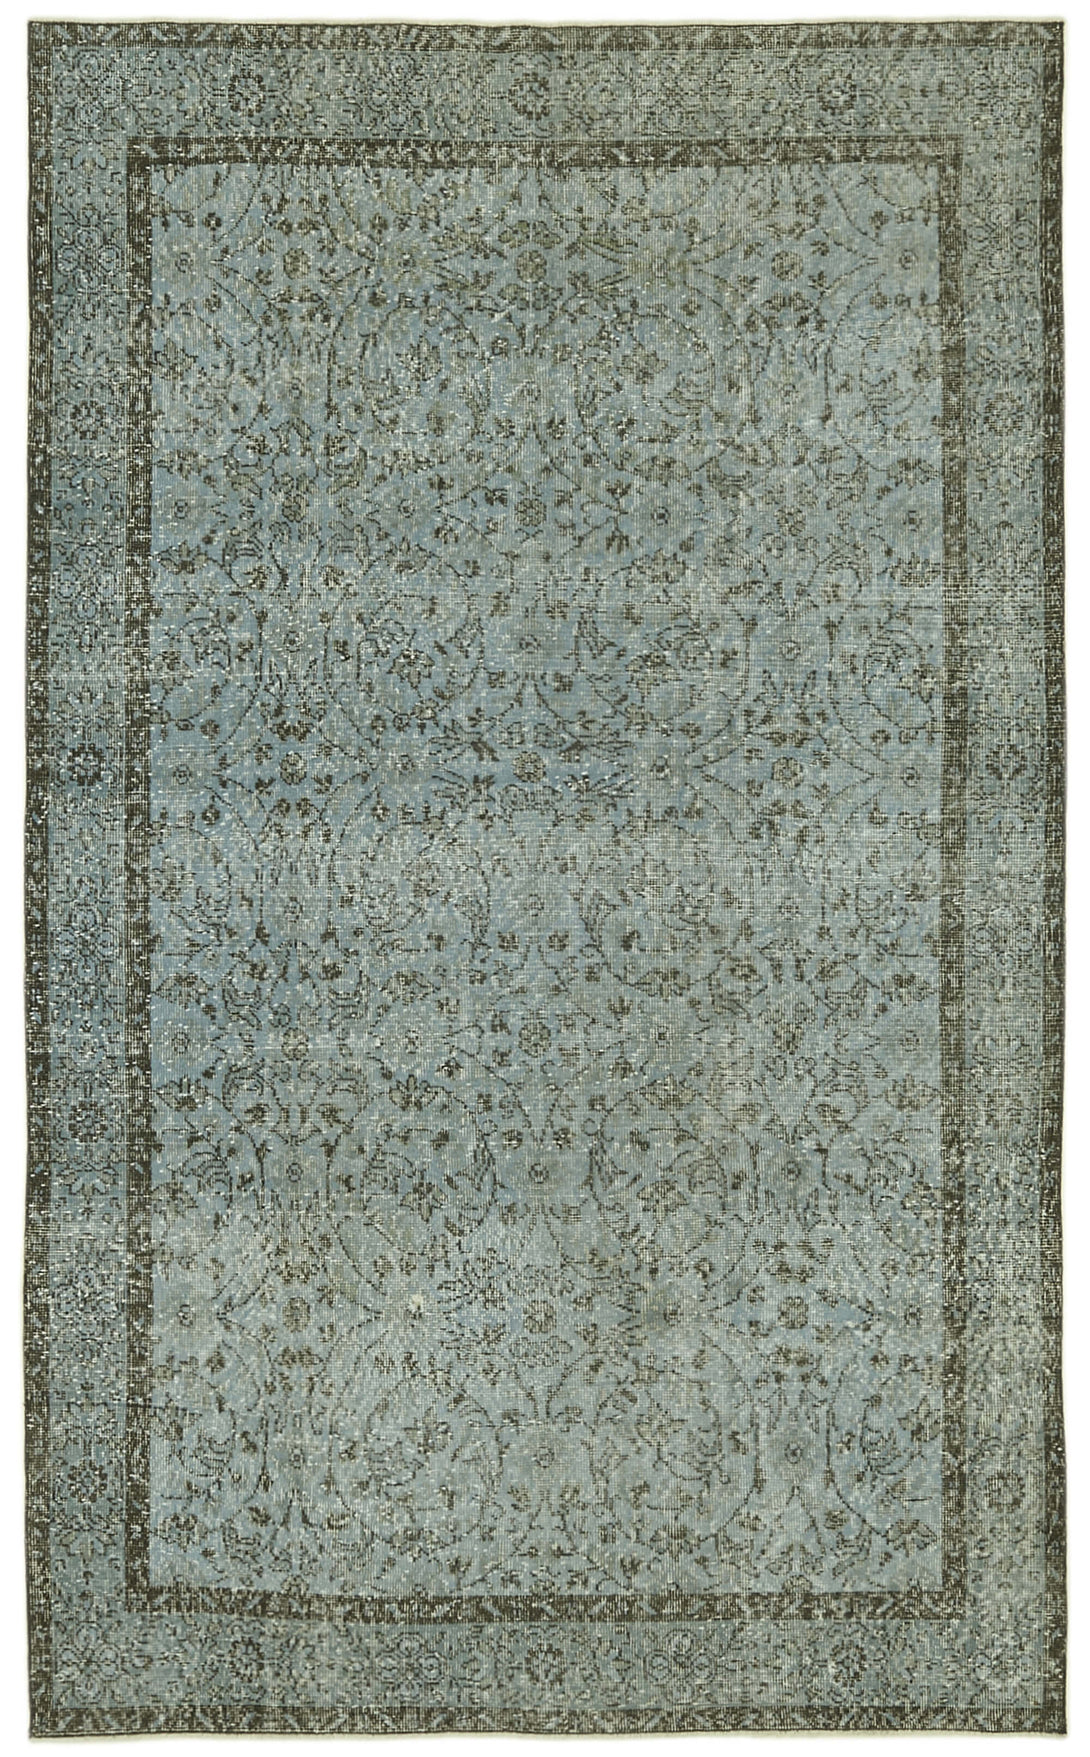 Handmade Overdyed Area Rug > Design# OL-AC-41233 > Size: 5'-9" x 9'-8", Carpet Culture Rugs, Handmade Rugs, NYC Rugs, New Rugs, Shop Rugs, Rug Store, Outlet Rugs, SoHo Rugs, Rugs in USA